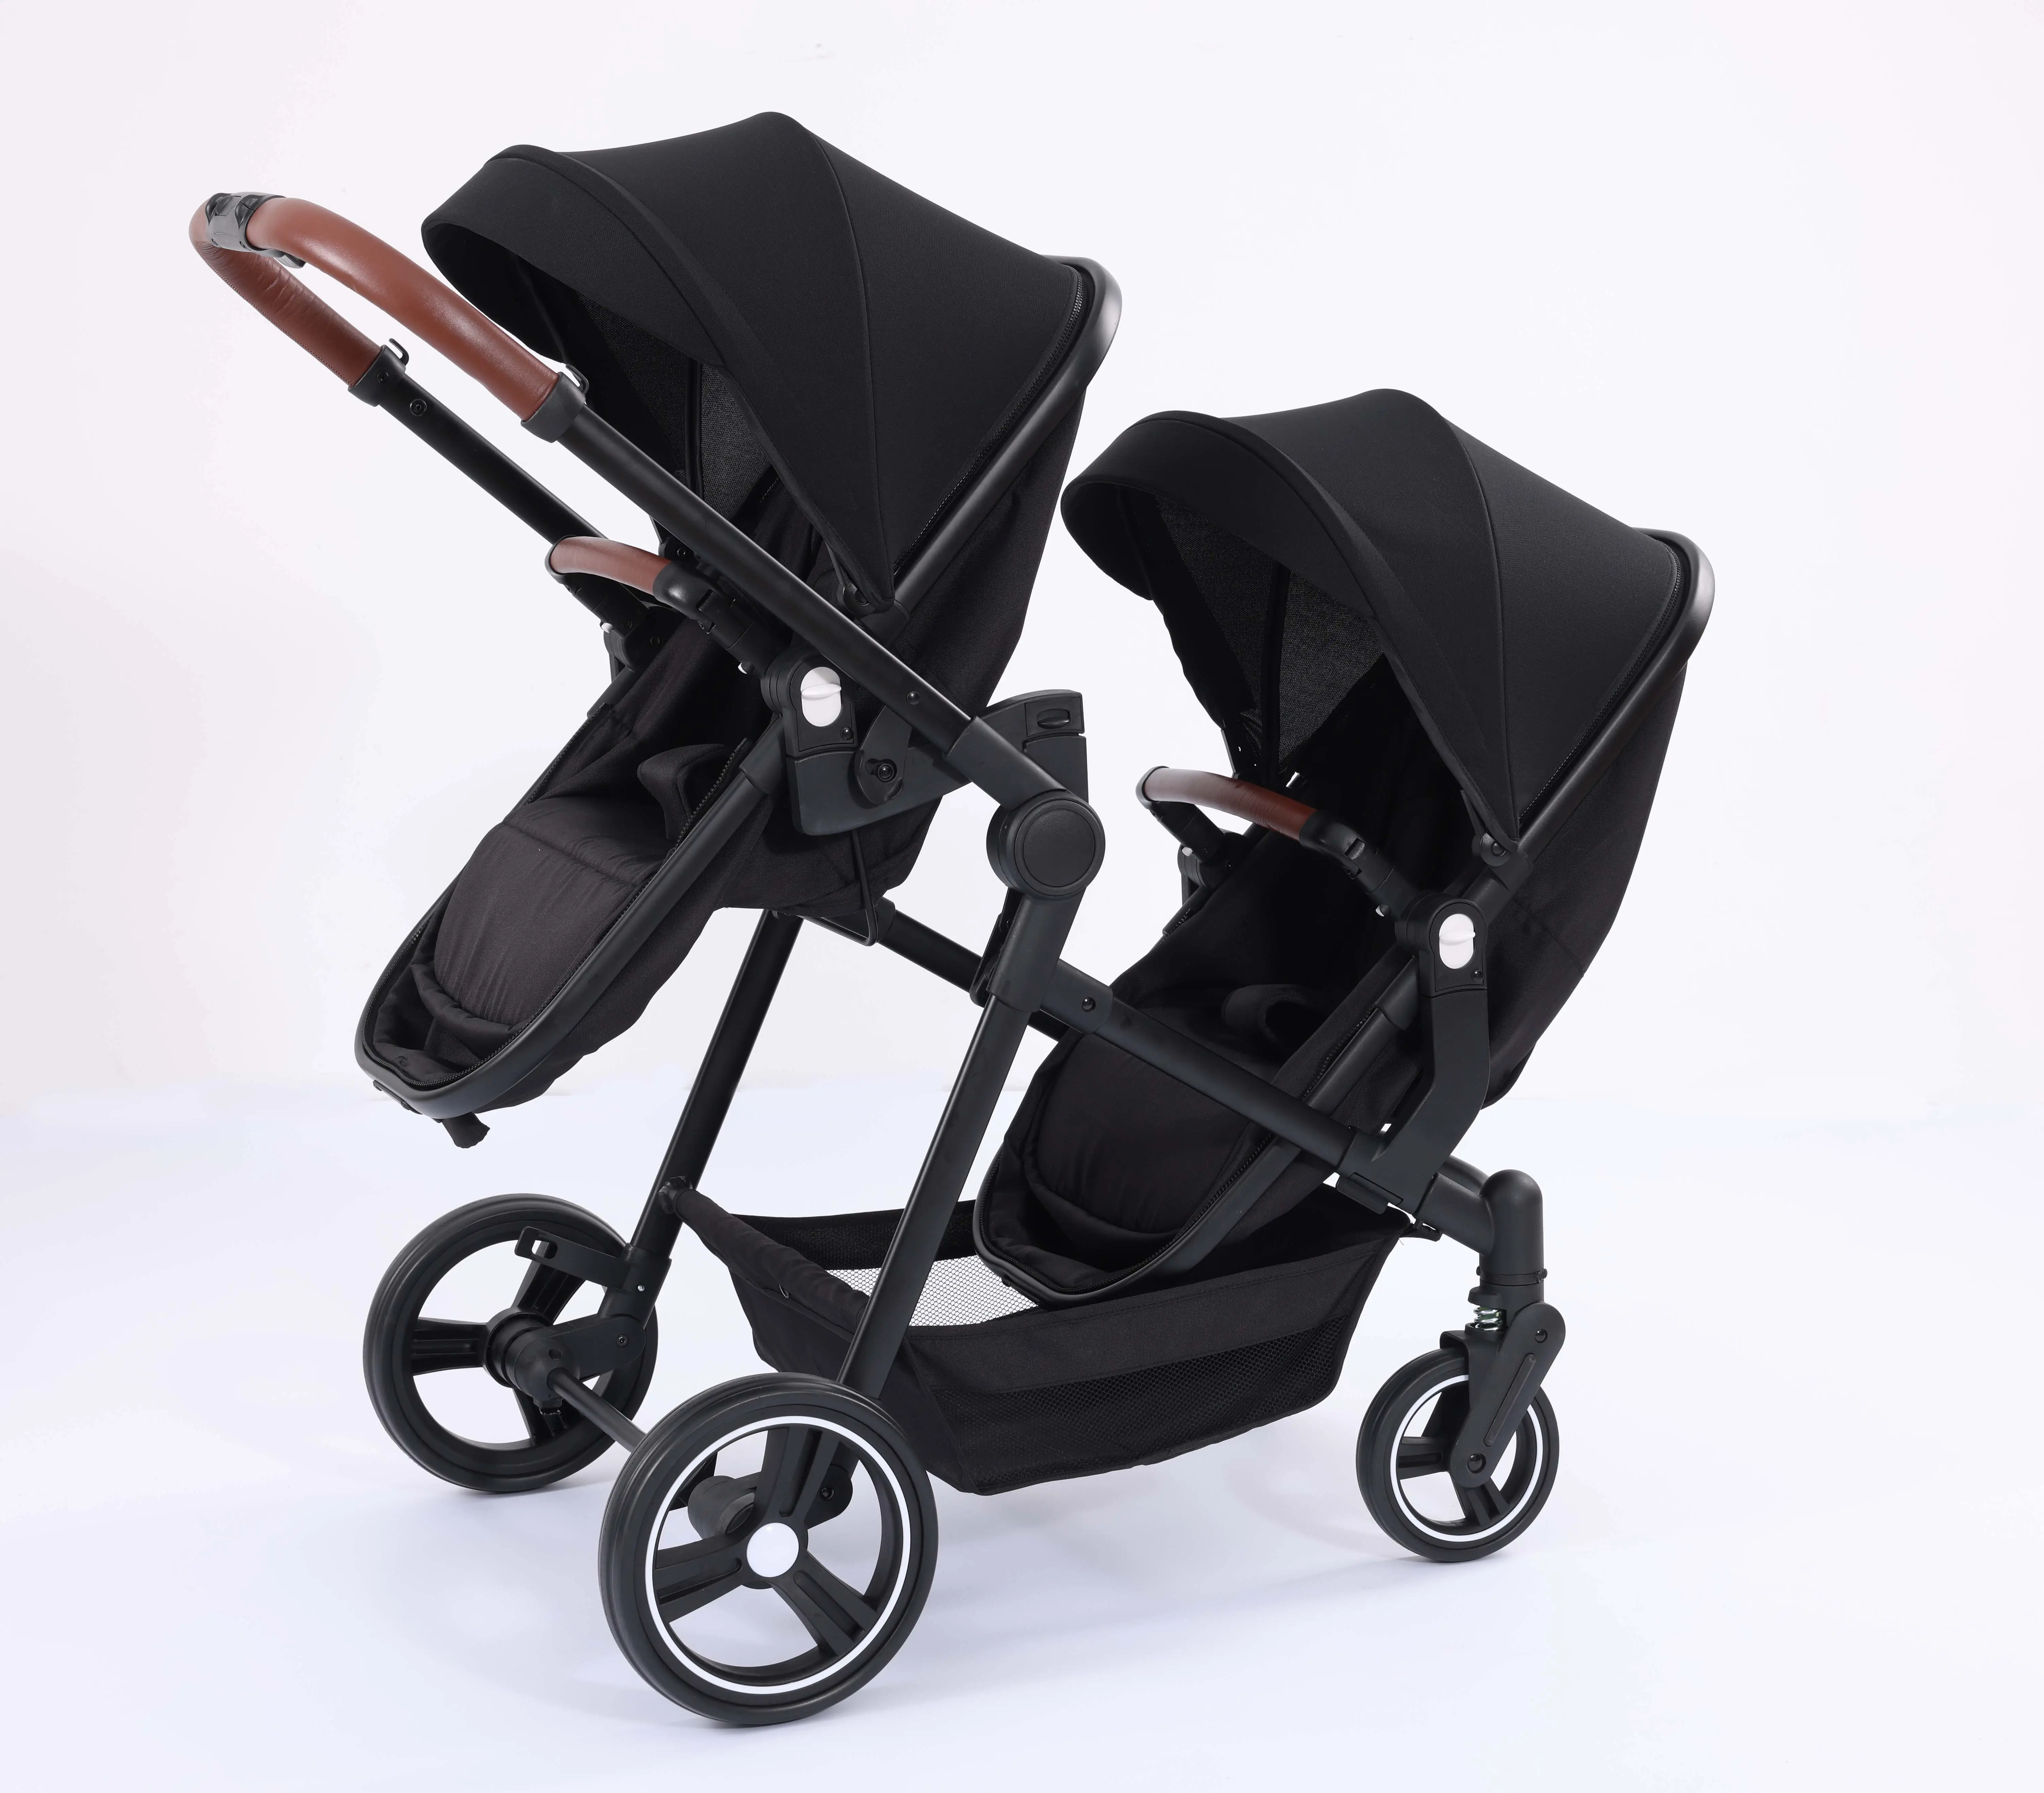 Hot sale Twin Stroller with reversible seat Multi-function Pushchair for double babies Luxury Tandem Stroller with car seat